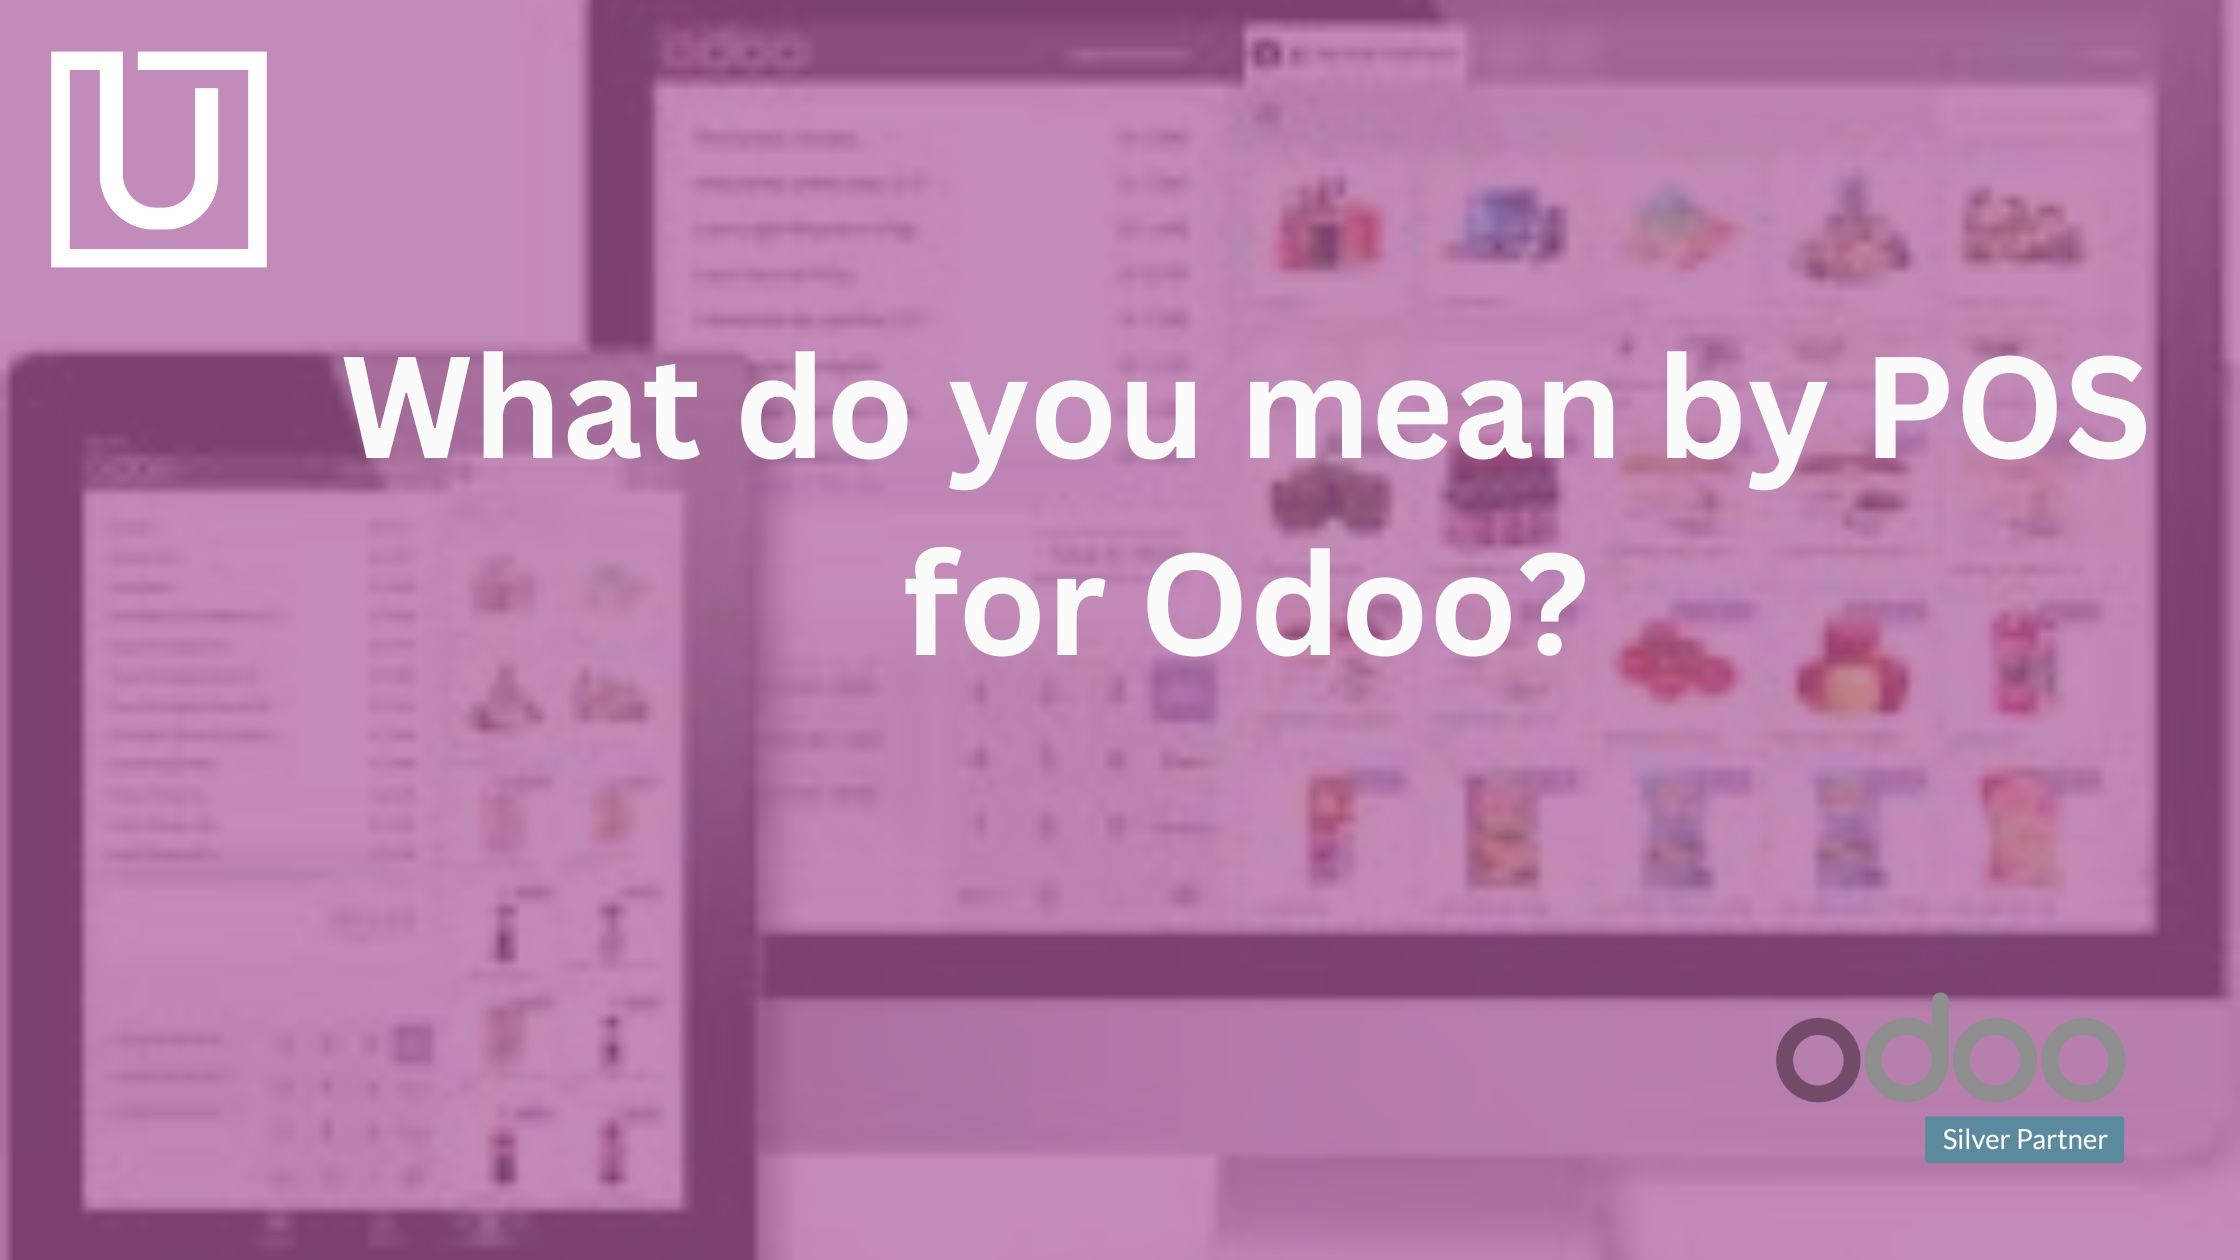 What do you mean by POS for Odoo?